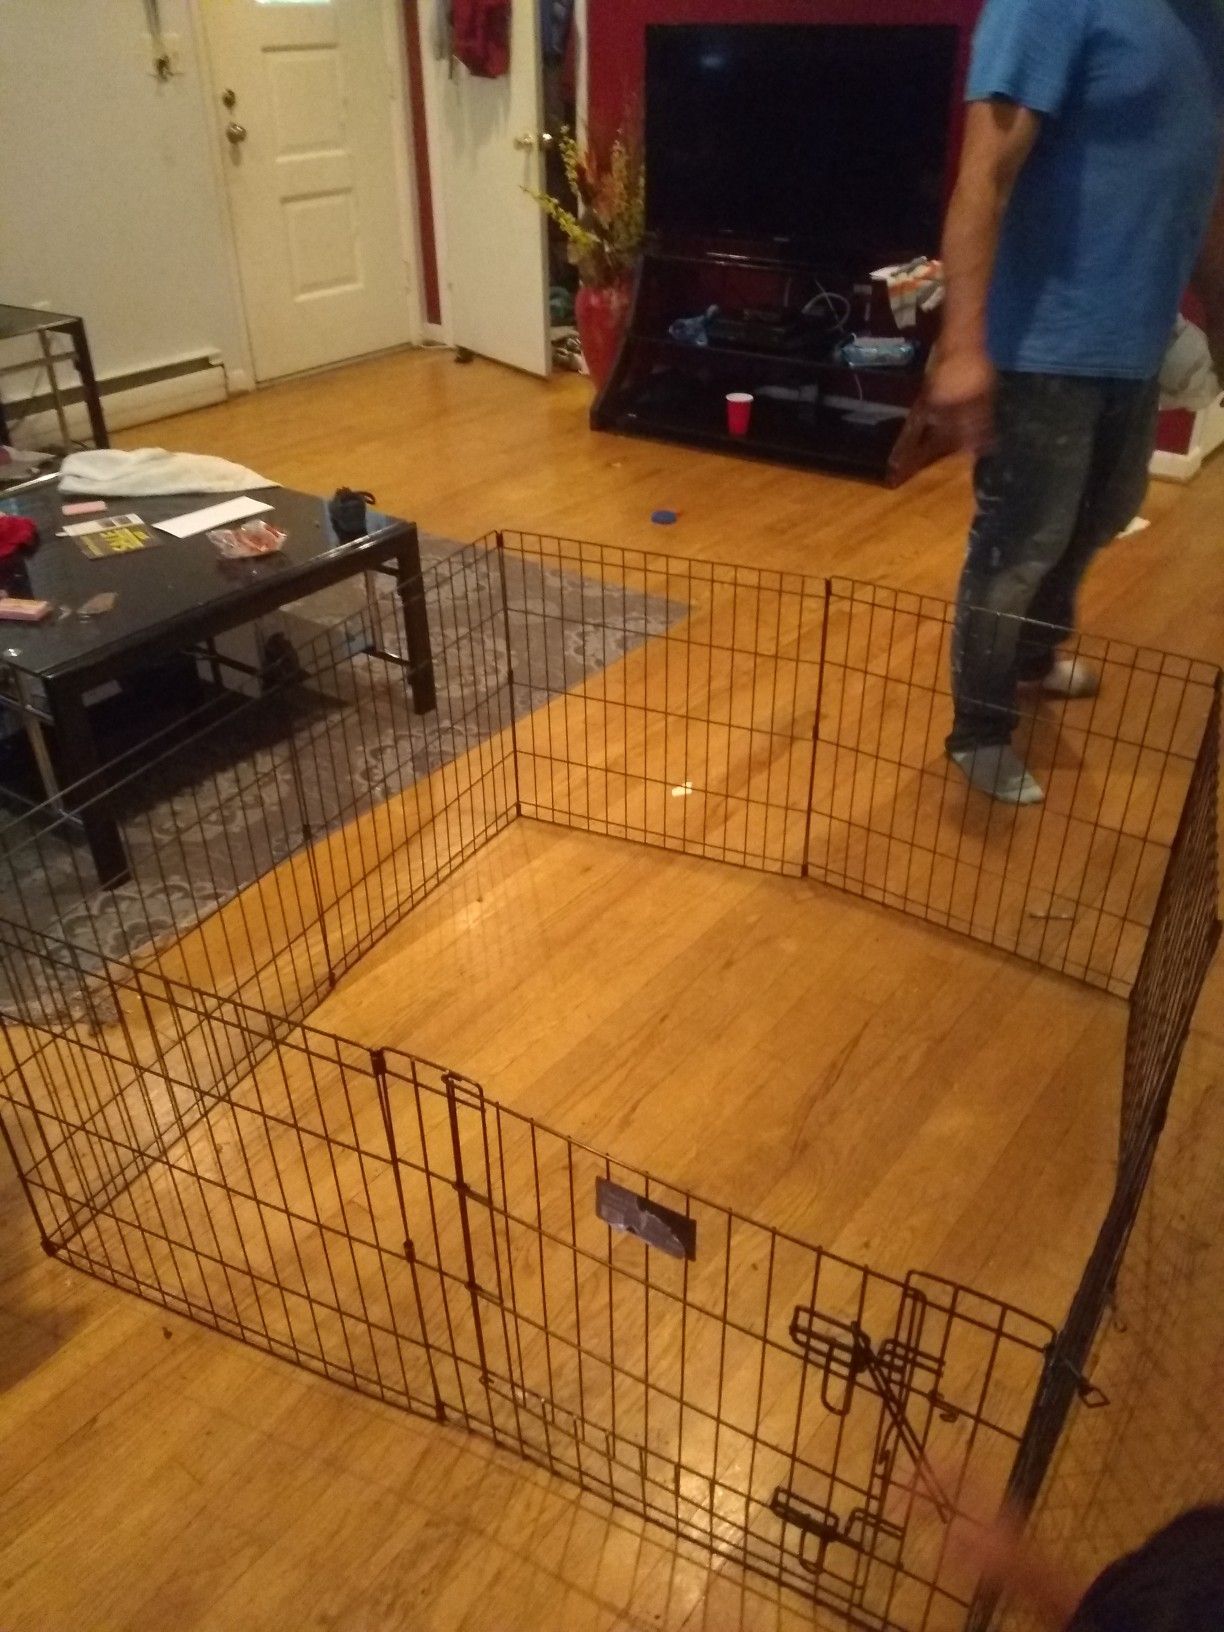 Cage for puppy dog